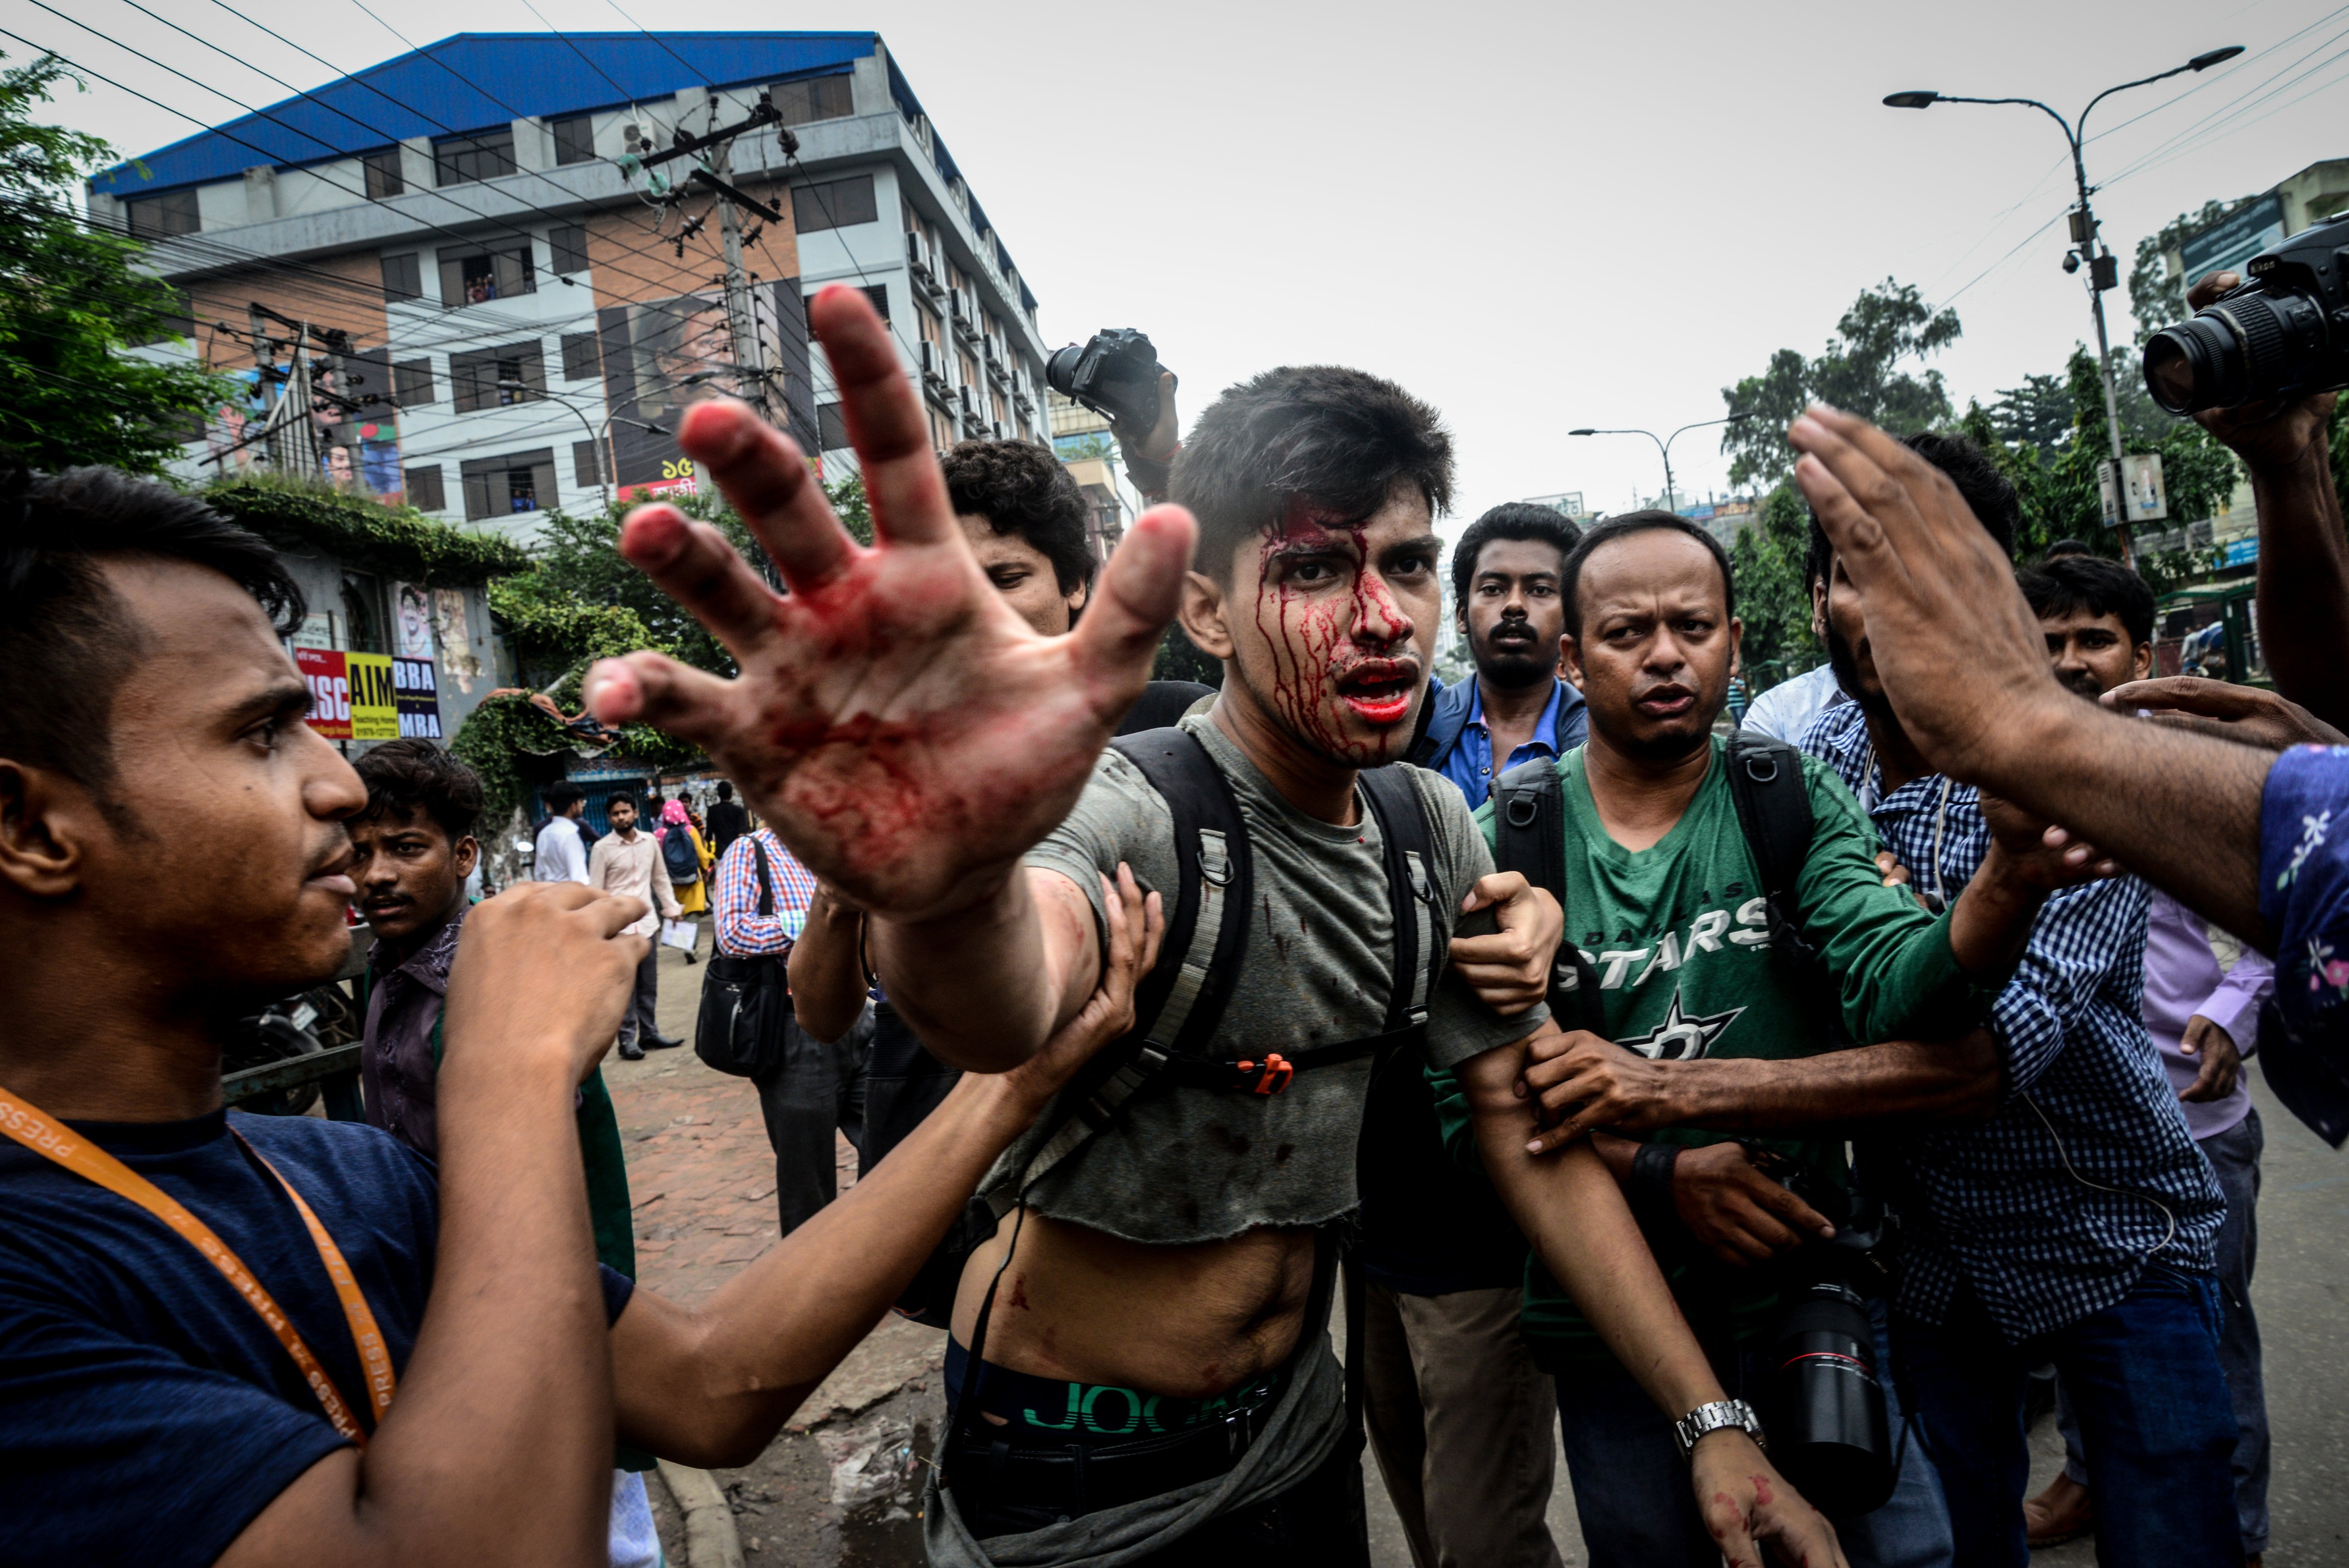 A photographer is attacked during a student protest in Dhaka on Aug. 5, 2018. (Mamunur Rashid—NurPhoto/Getty Images)